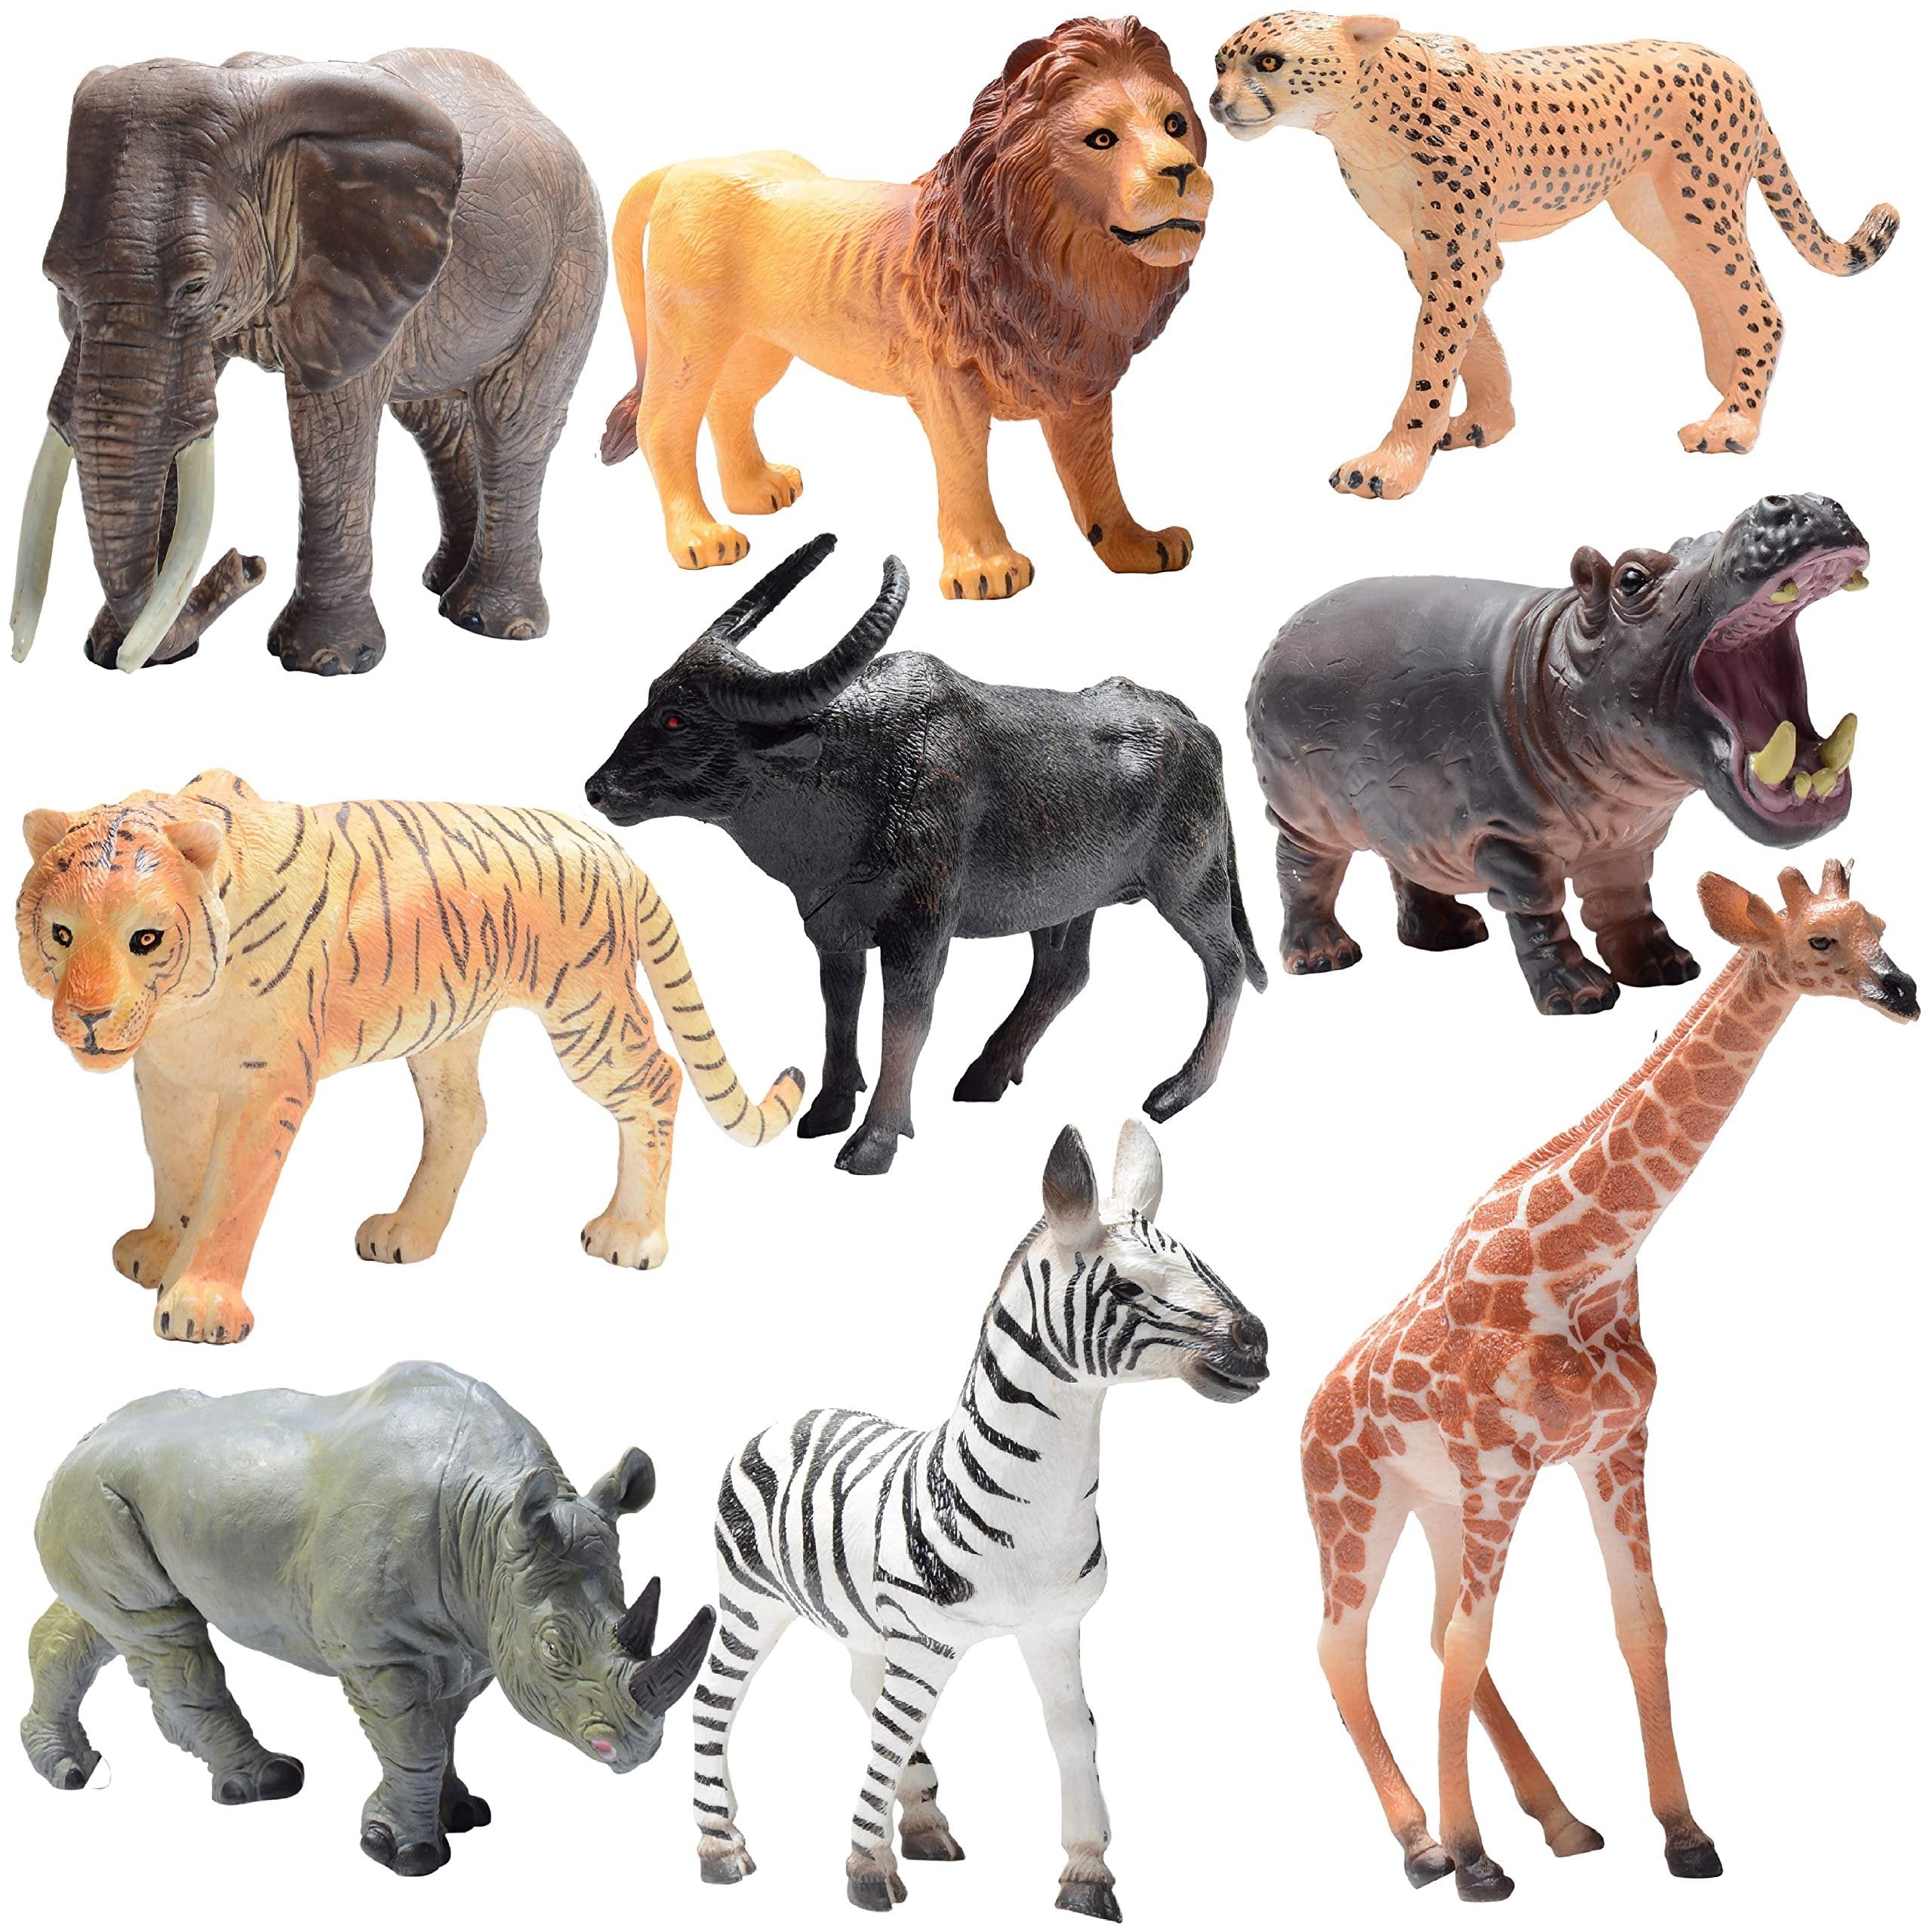 Prextex Realistic Safari Animal Figurines - 9 Large Plastic Figures - Jungle, Zoo, Forest, and Wild Animal Toys with Educational Animals Book, Safari Animals Figures - Birthday Gift, Toddlers 3+ Years